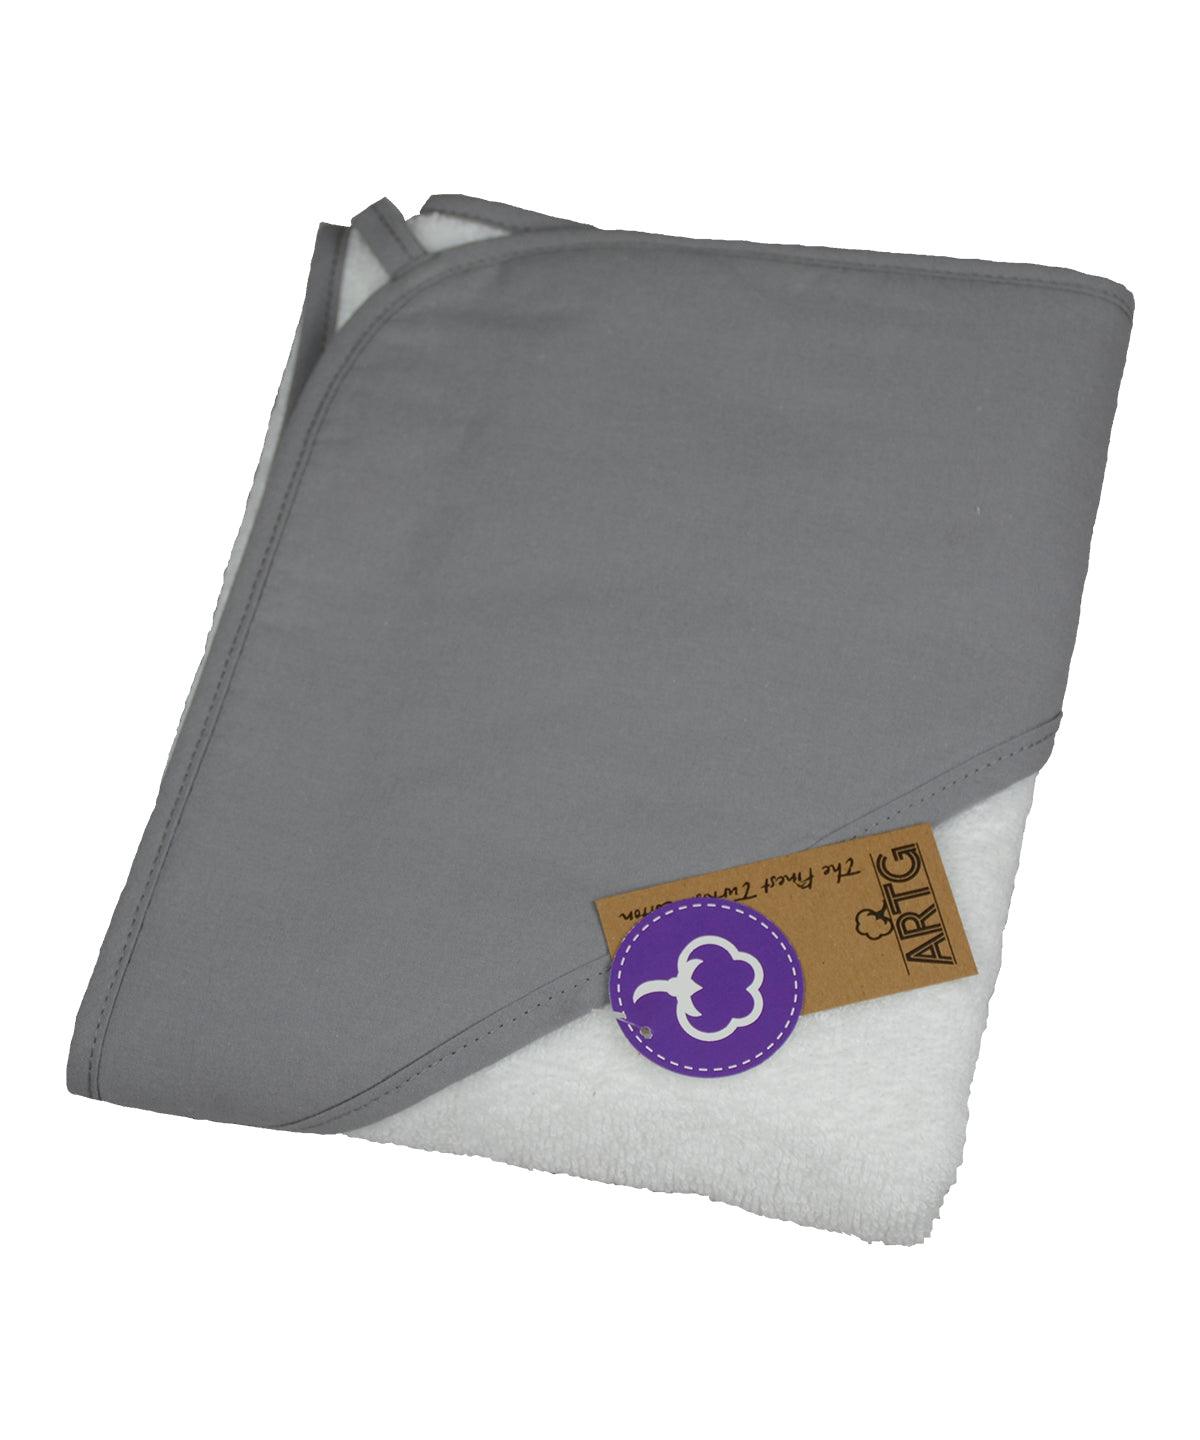 White/Anthracite Grey/Anthracite Grey - PRINT-Me® baby hooded towel Towels A&R Towels Homewares & Towelling, Plus Sizes, Rebrandable Schoolwear Centres